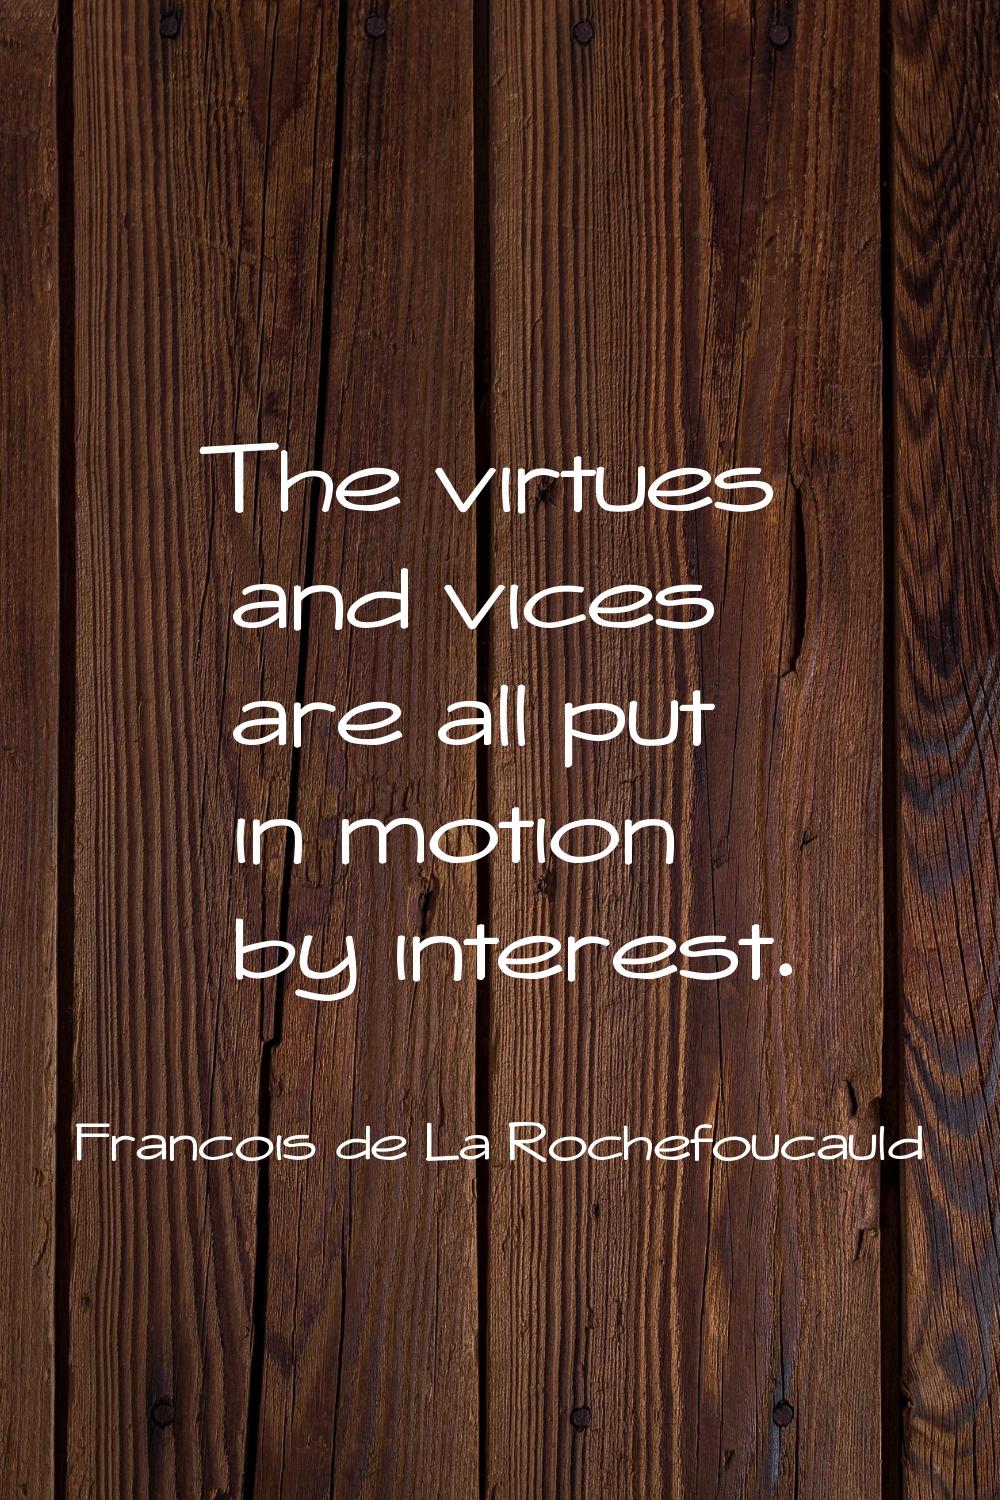 The virtues and vices are all put in motion by interest.